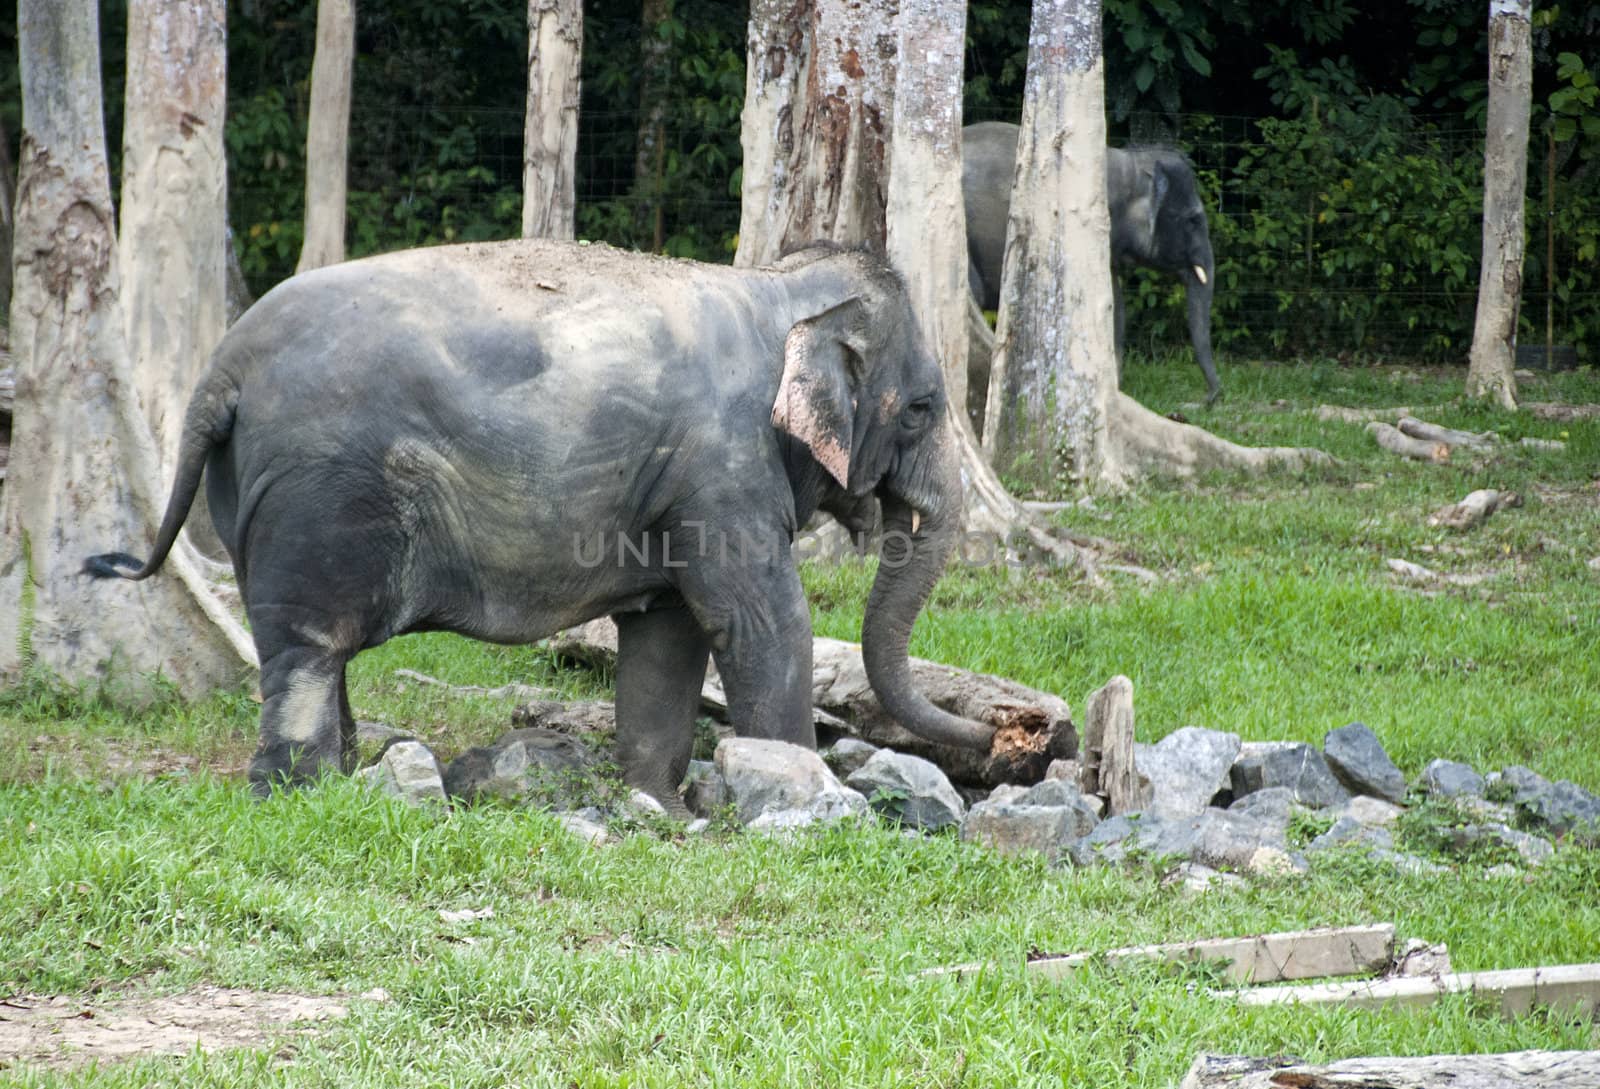 elephants in Malaysia in the place Gandah